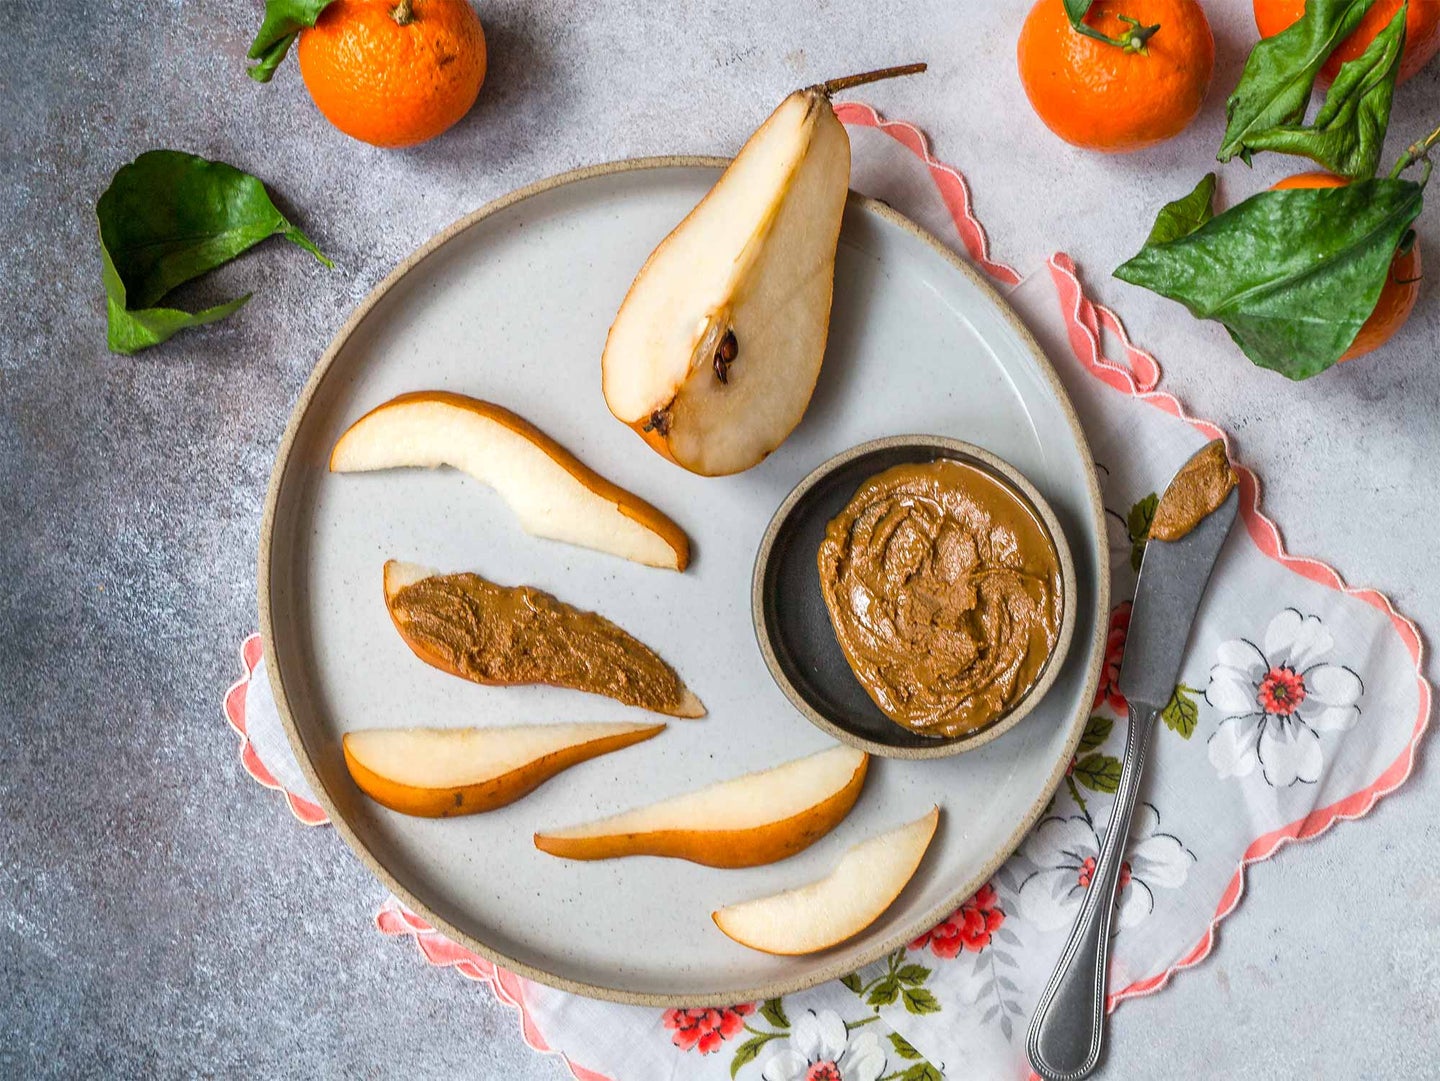 Almond butter on pear slices